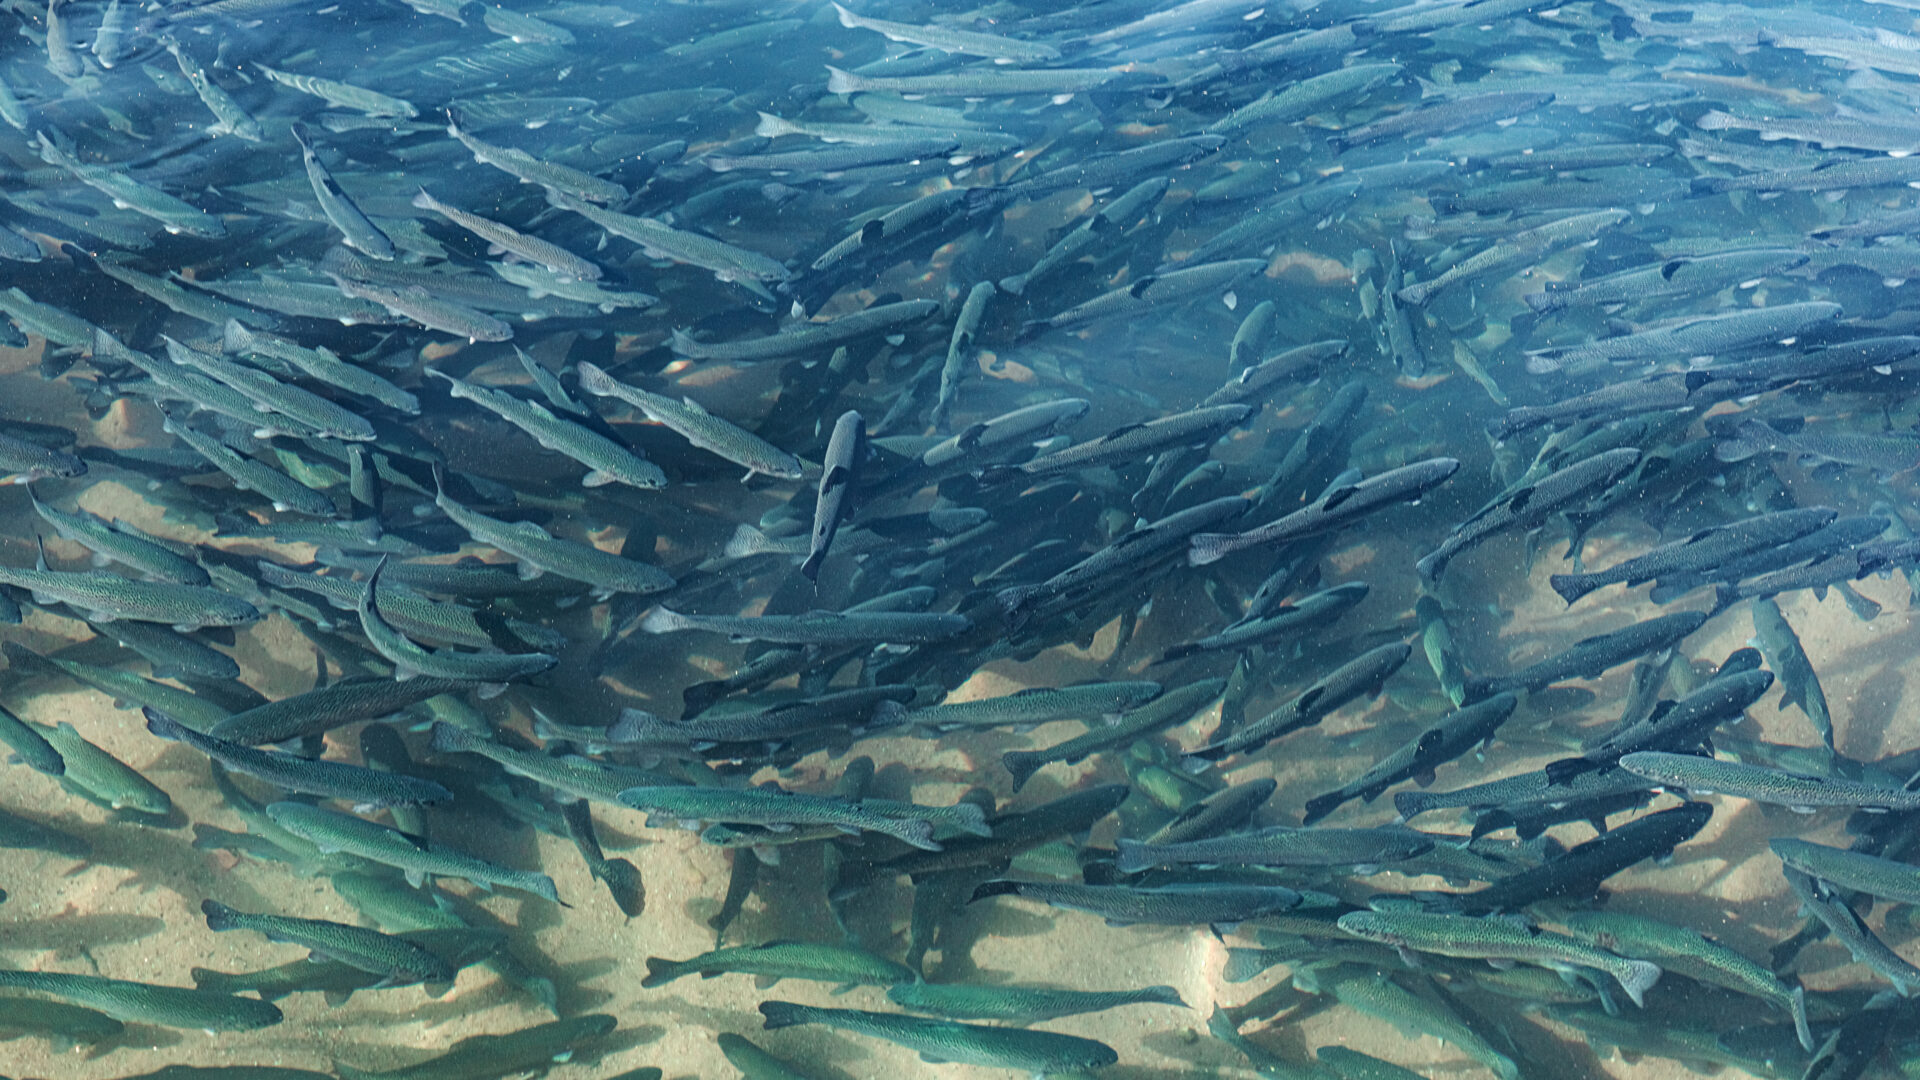 A large group of fish swimming in the water.